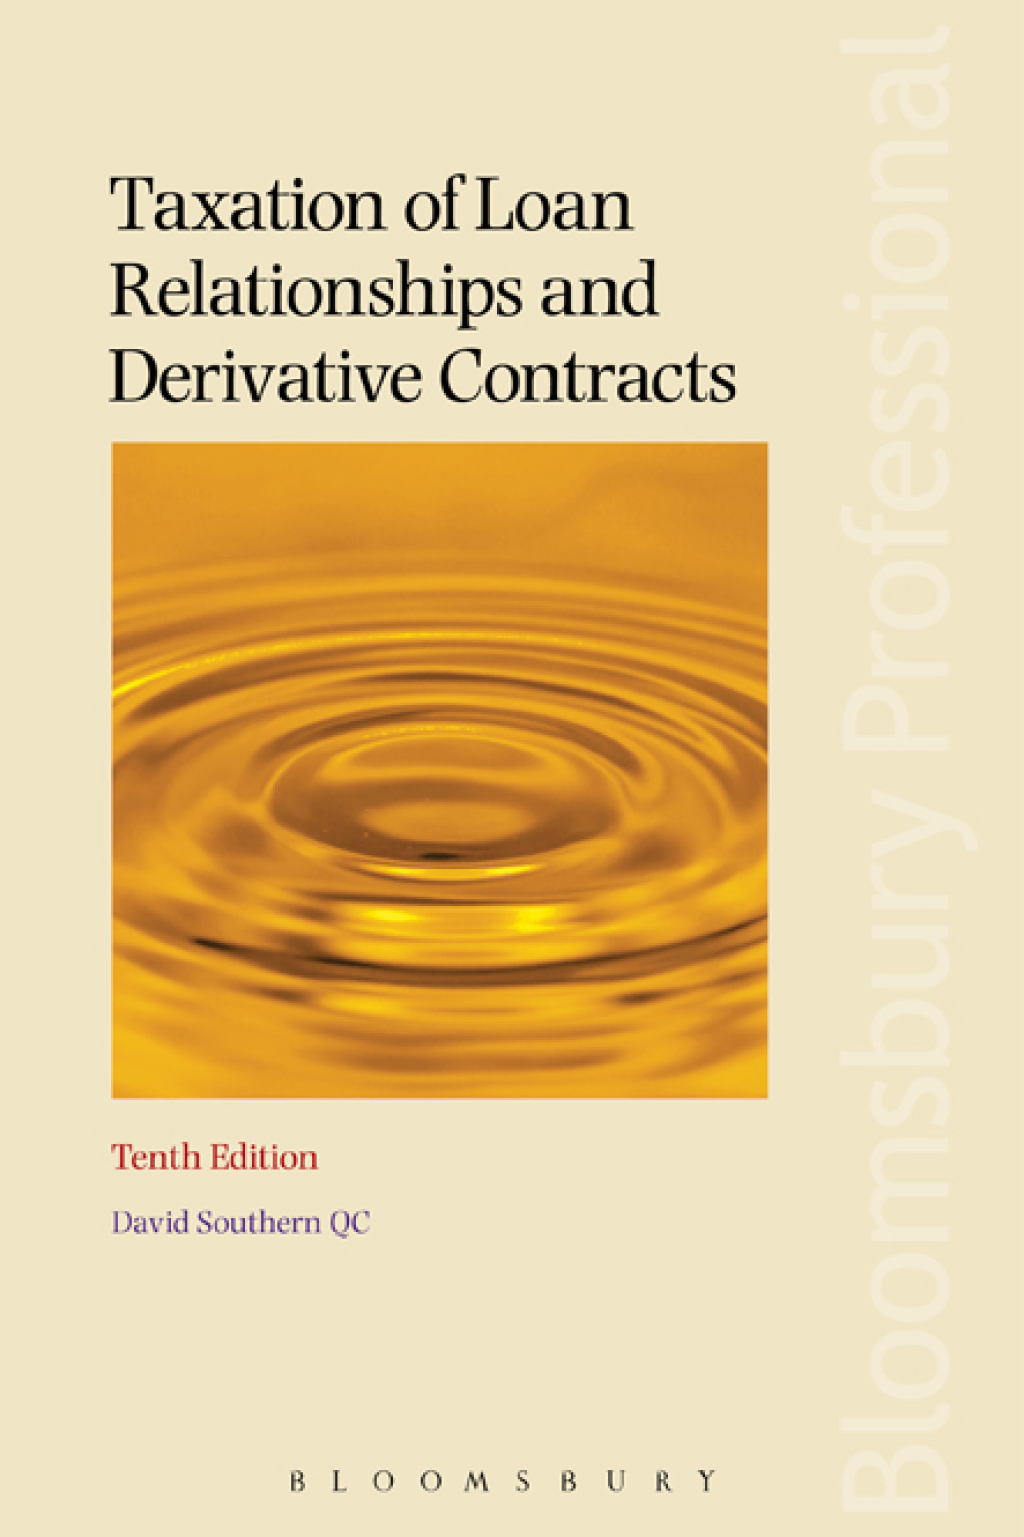 Taxation of Loan Relationships and Derivative Contracts - 10th Edition (eBook)